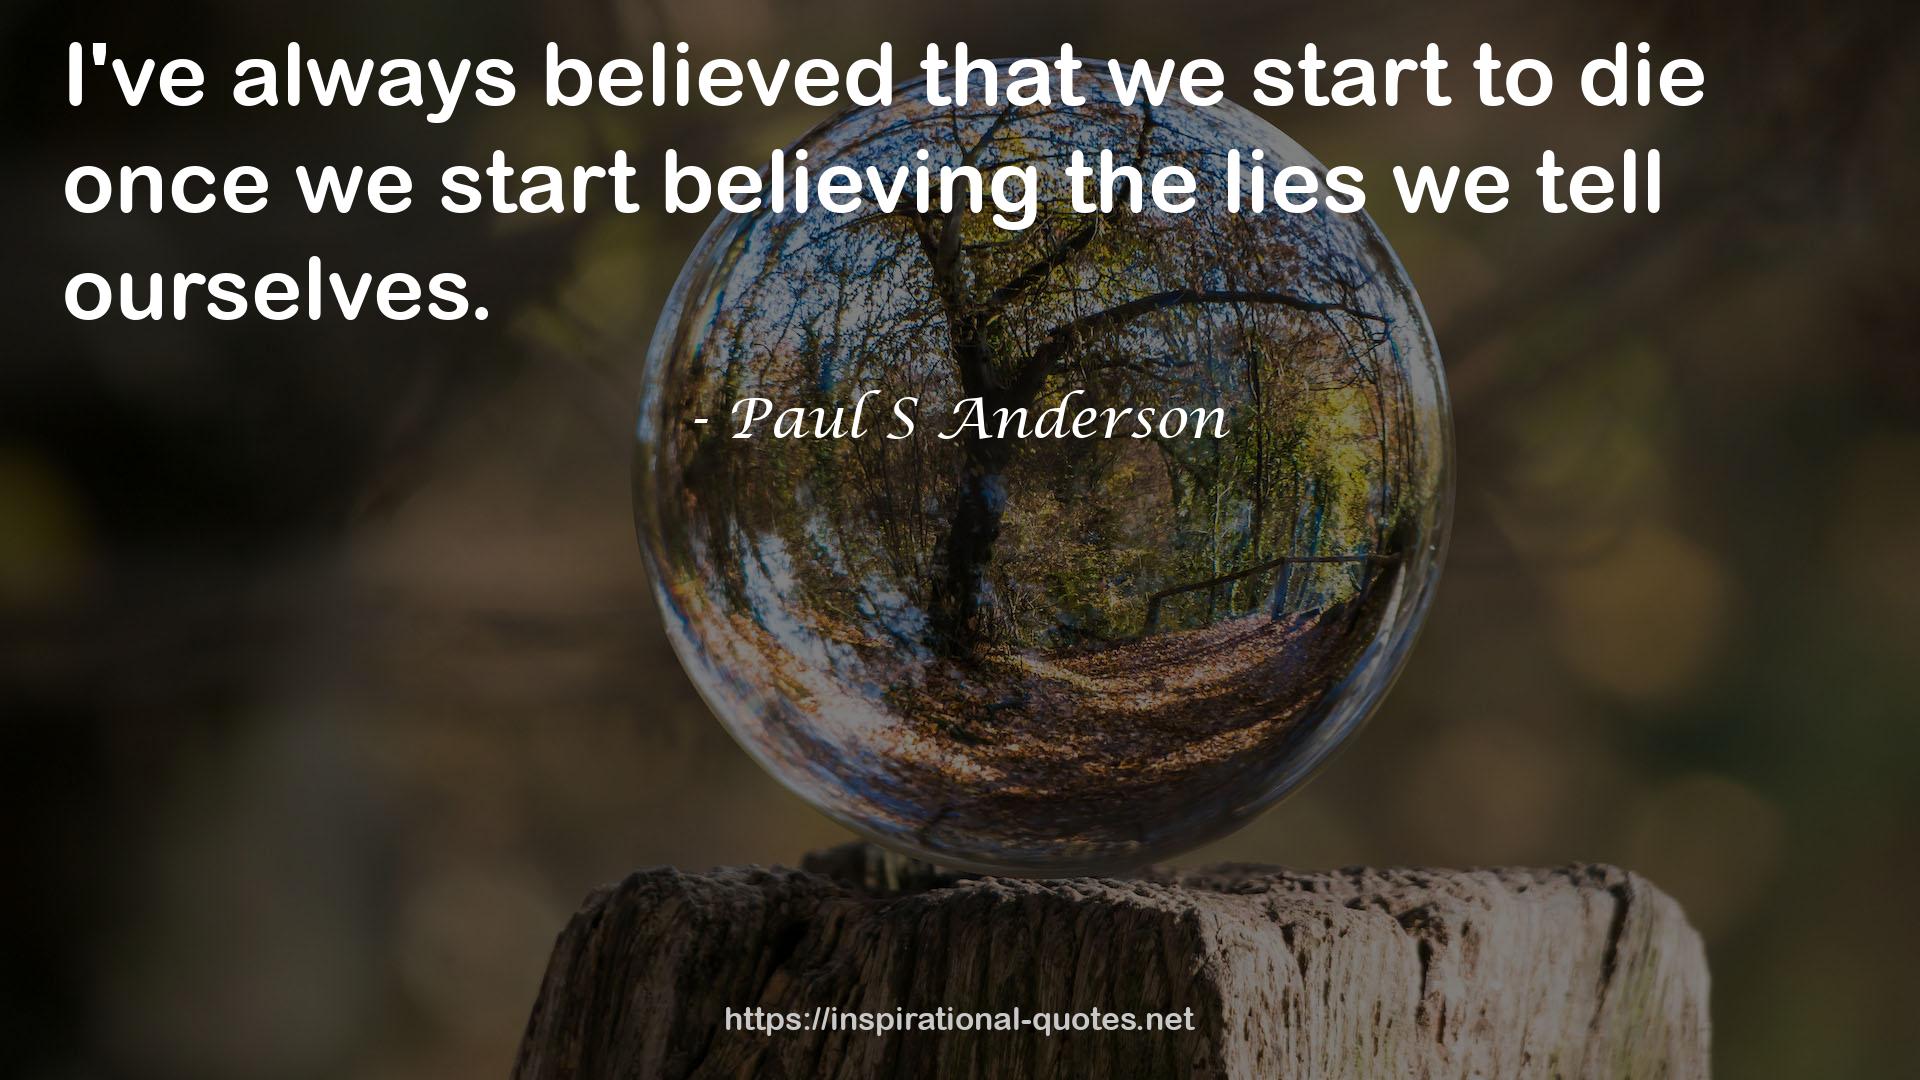 Paul S Anderson QUOTES